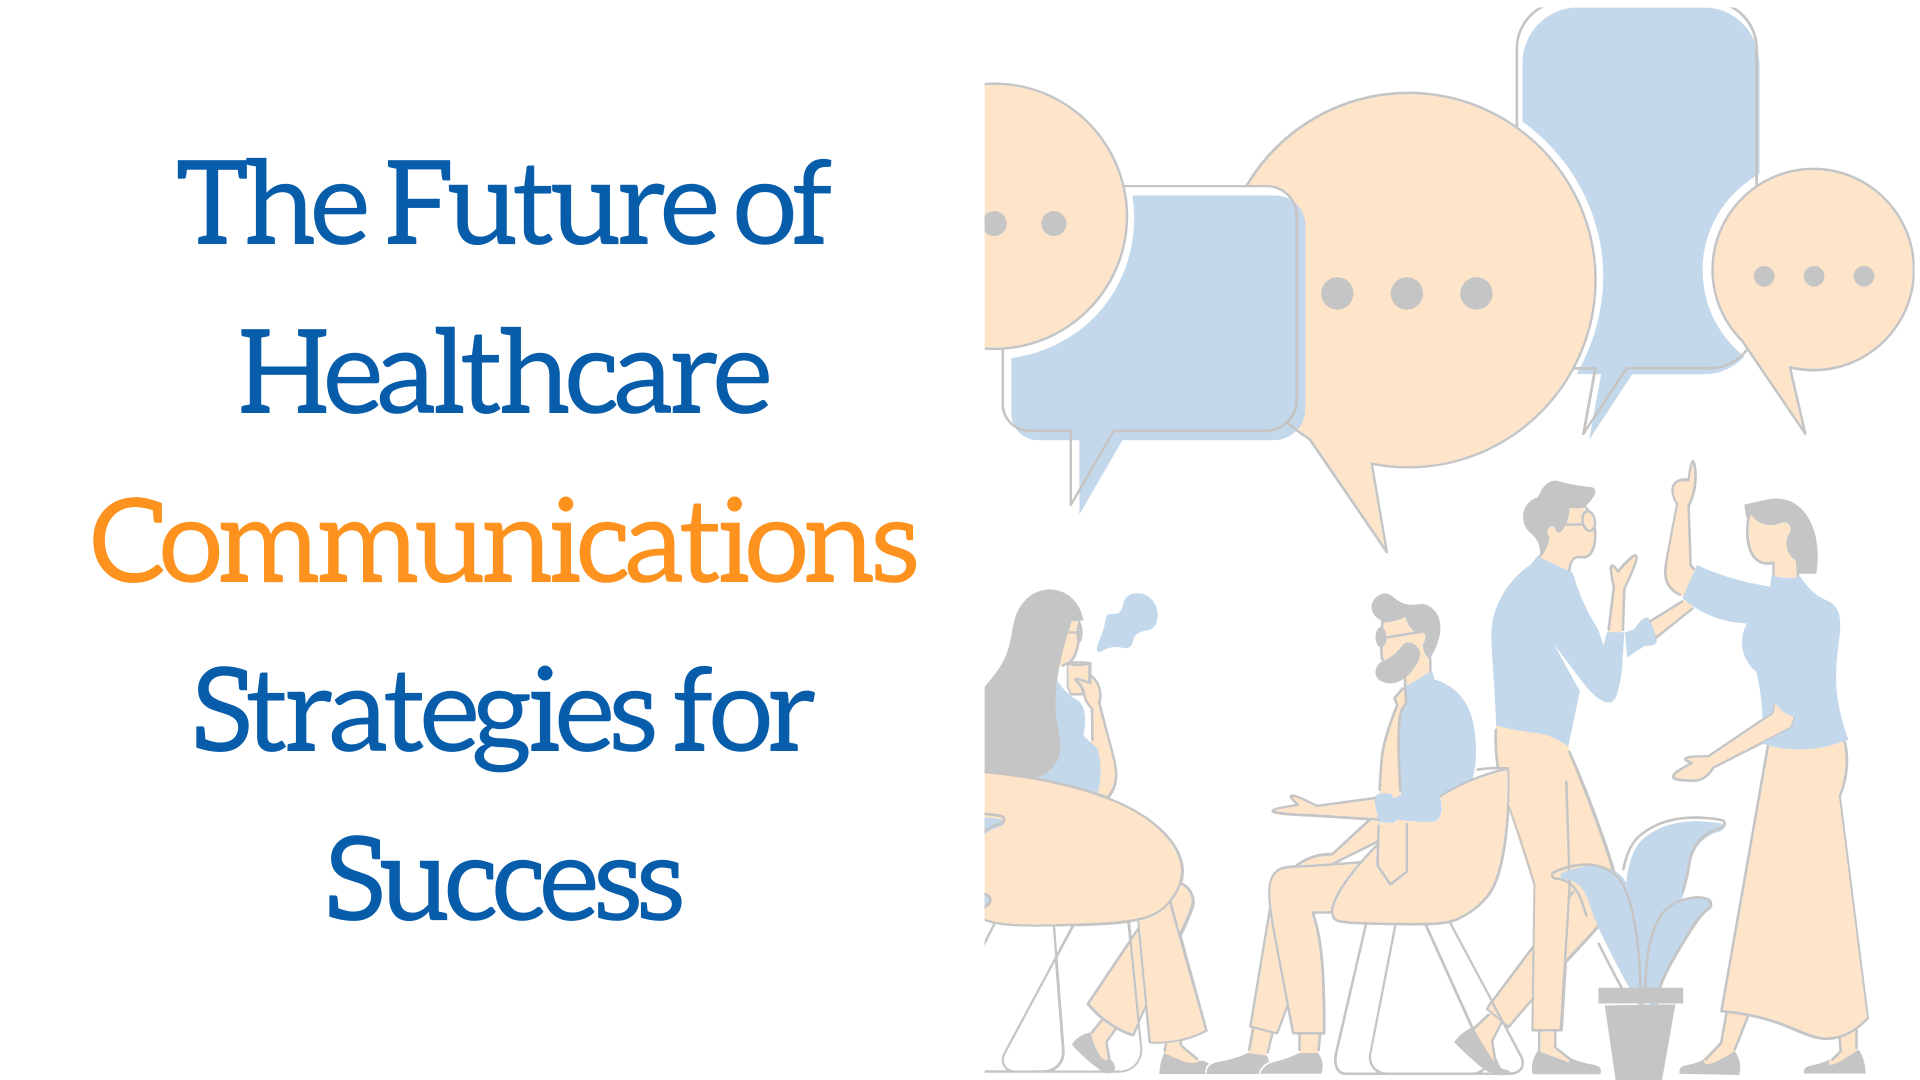 The Future of Healthcare Communications Strategies for Success